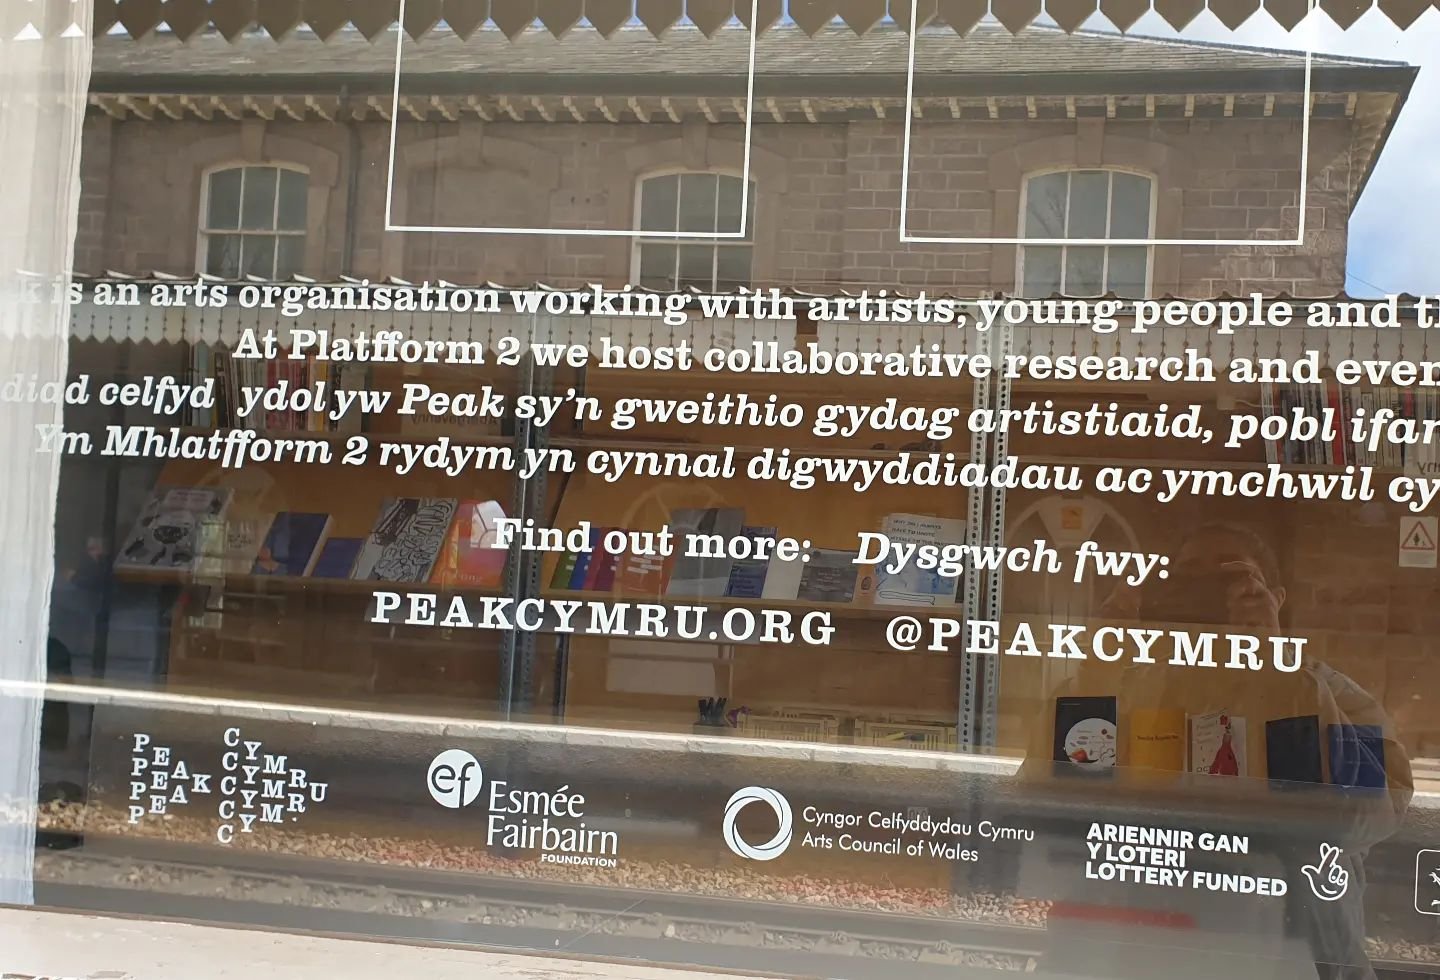 Love seeing this window by @peakcymru celebrating Platfform 2 gallery and arts event space at Abergavenny Station